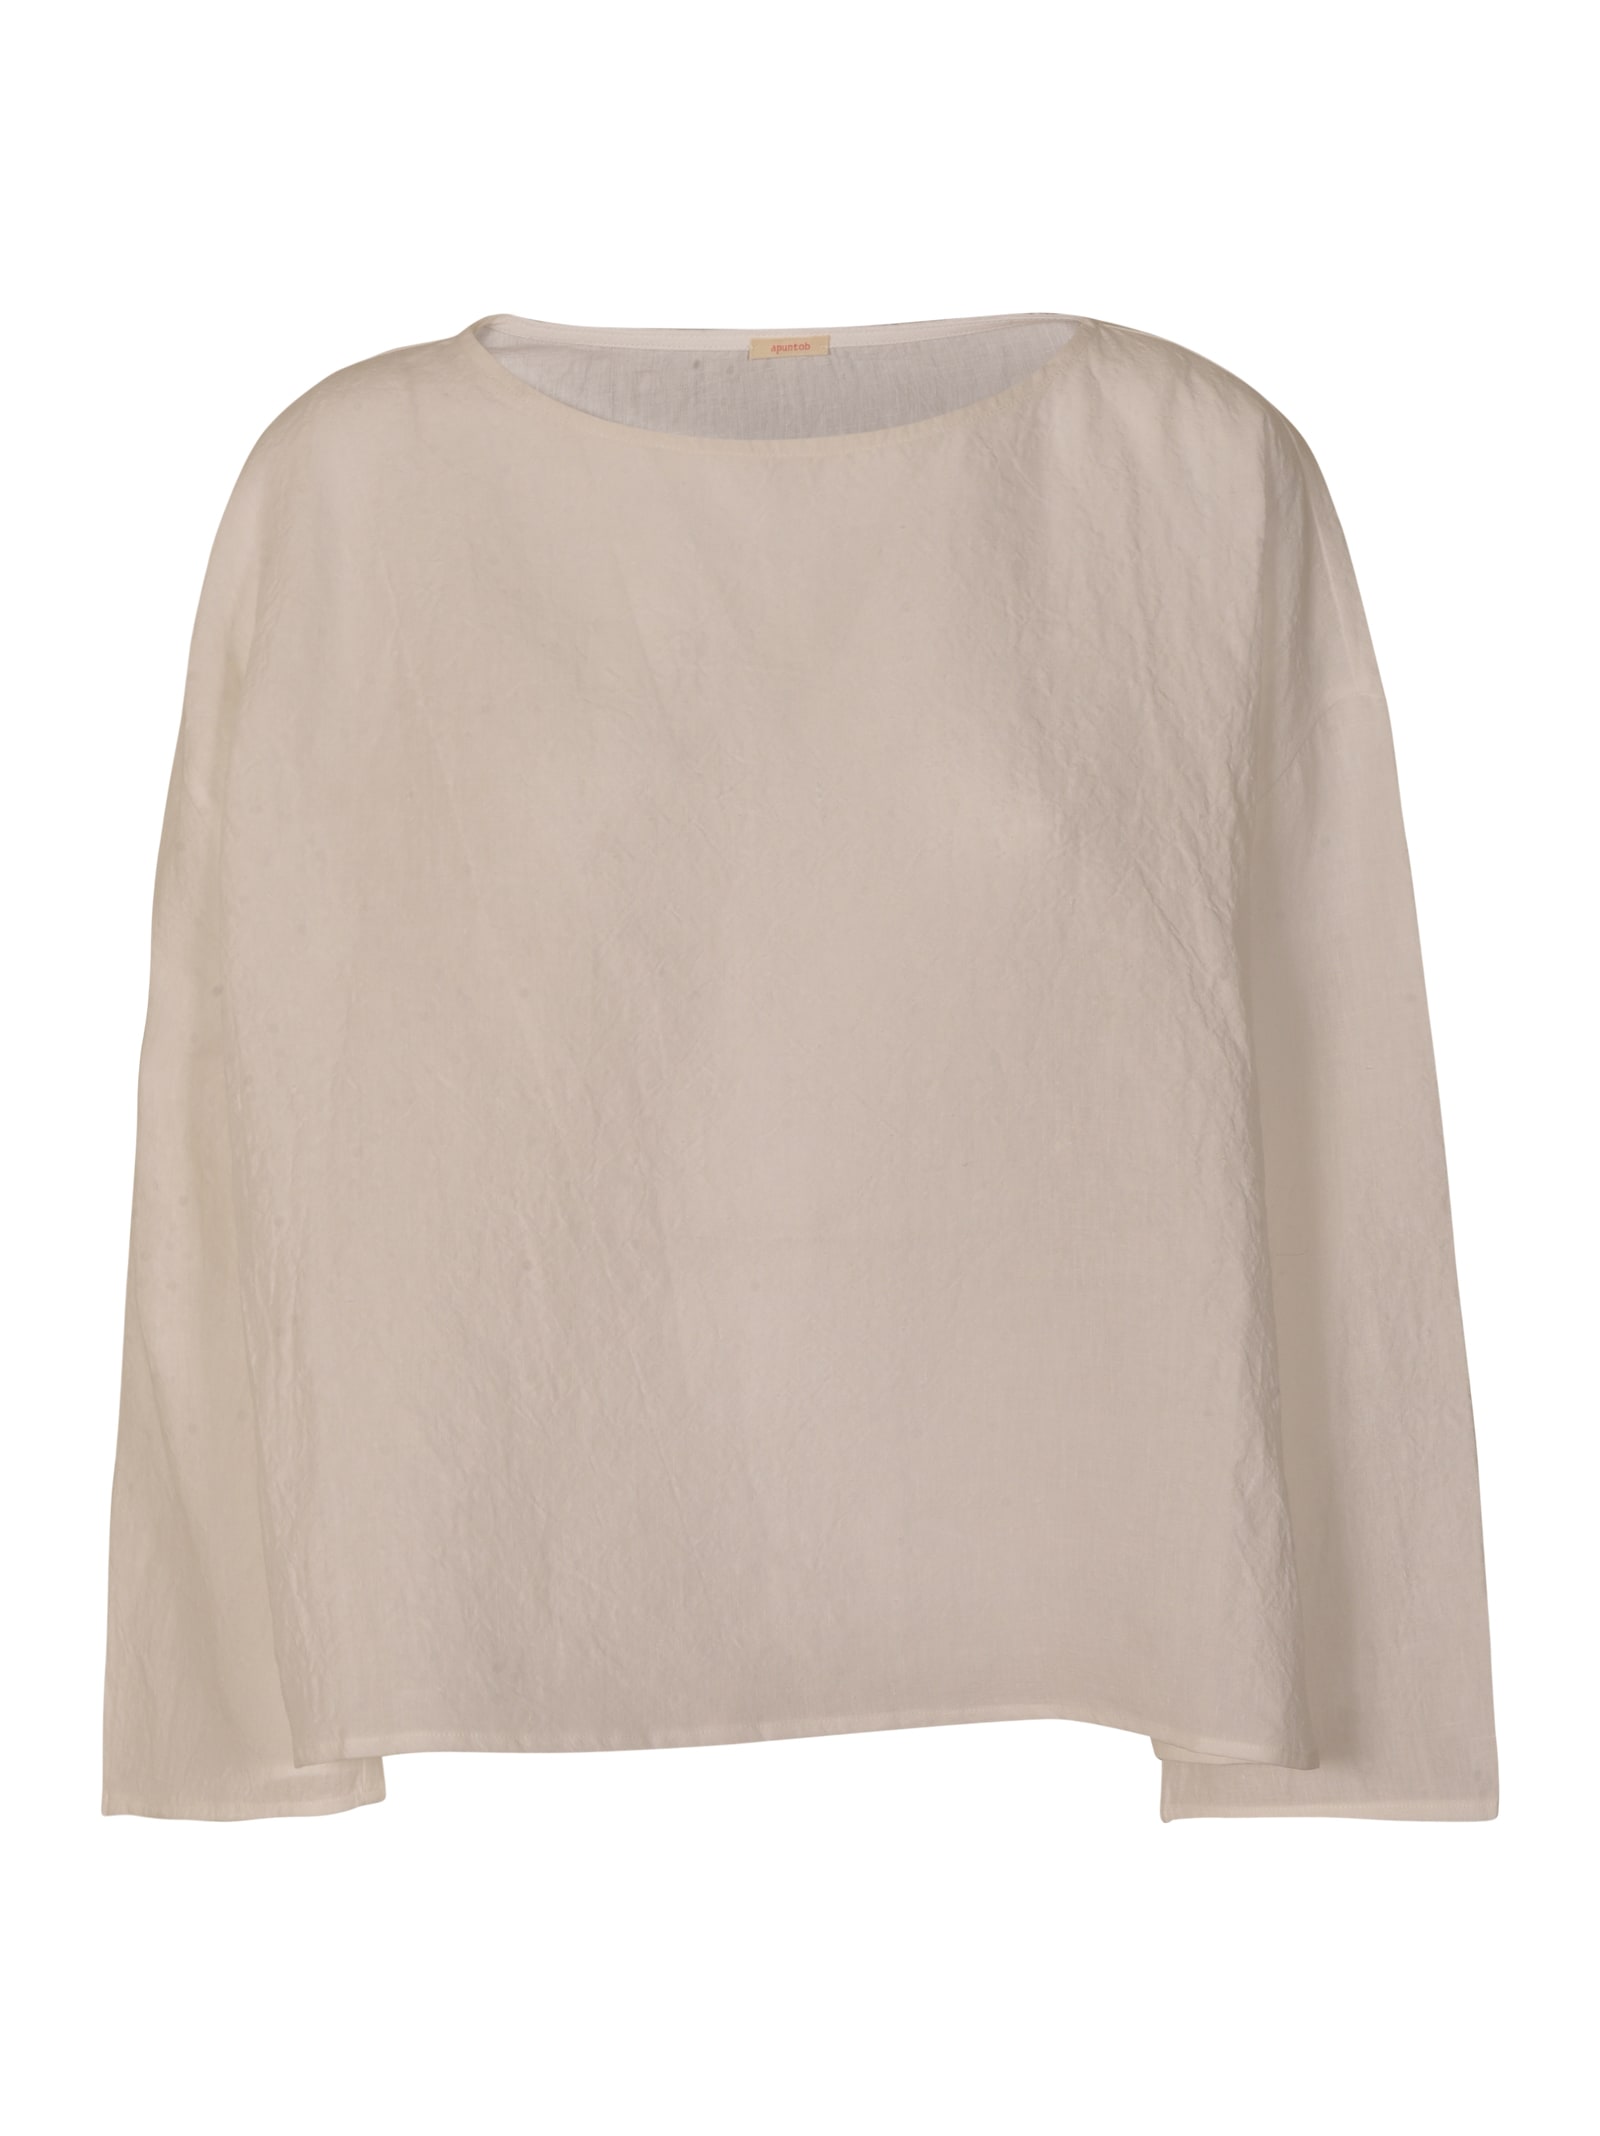 A Punto B Oversized Cropped Top